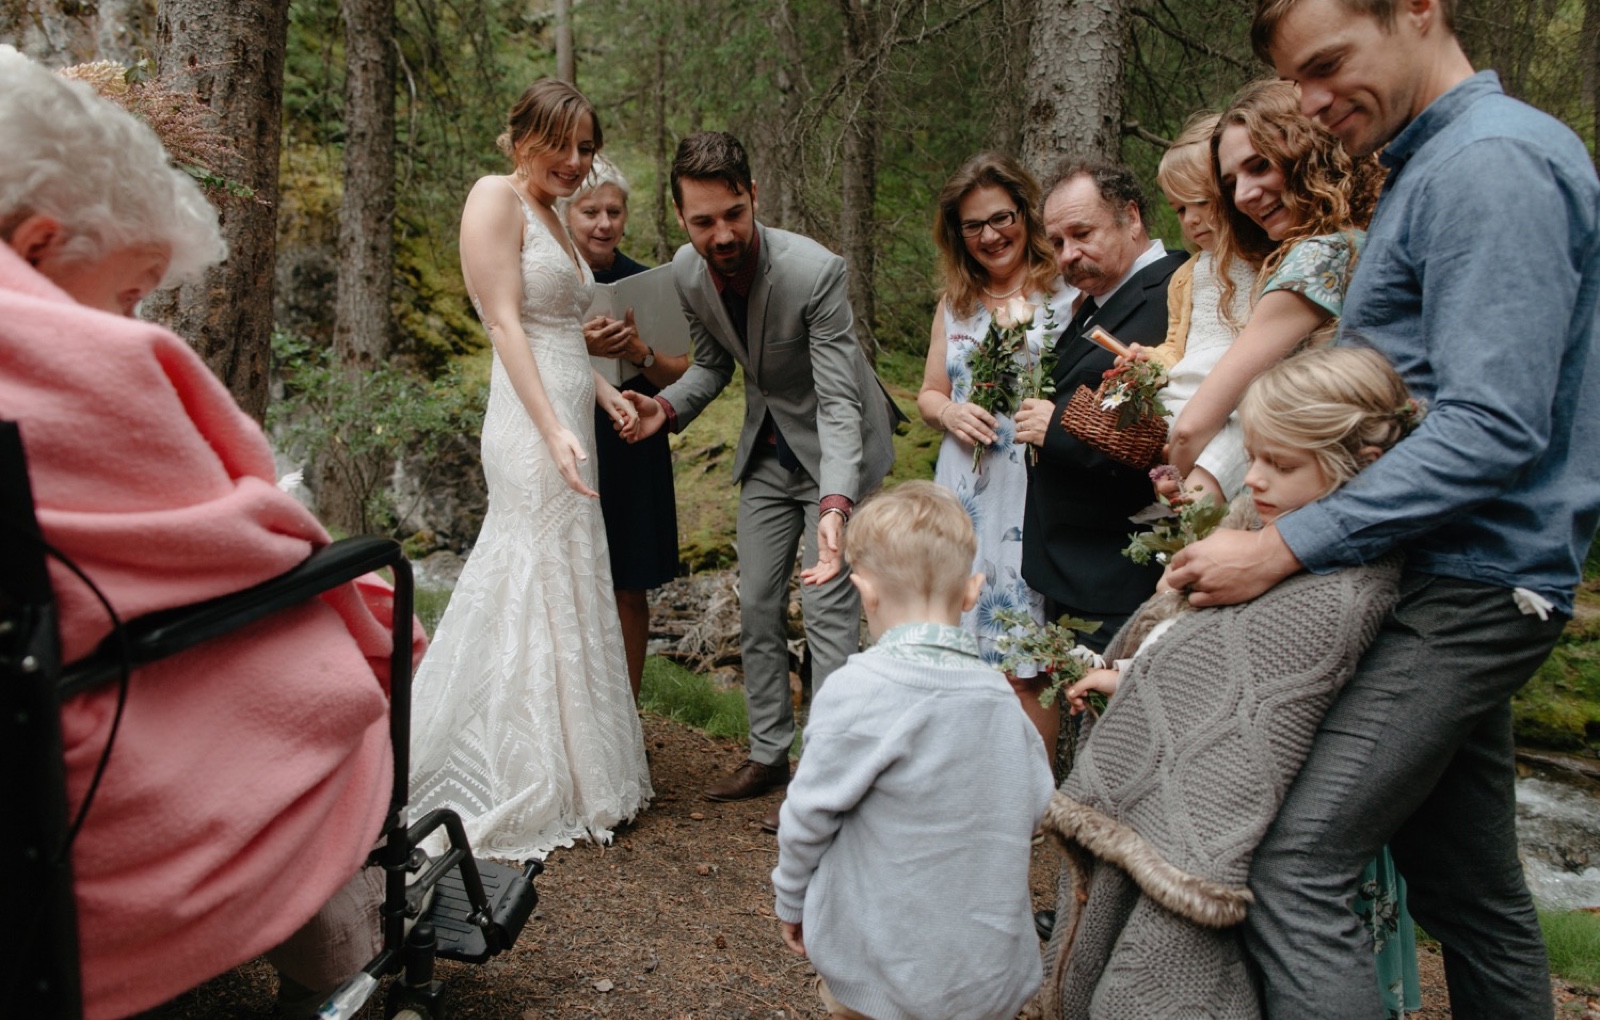 Ringbearer fulfilling his duties at a standing ceremony in Banff National Park